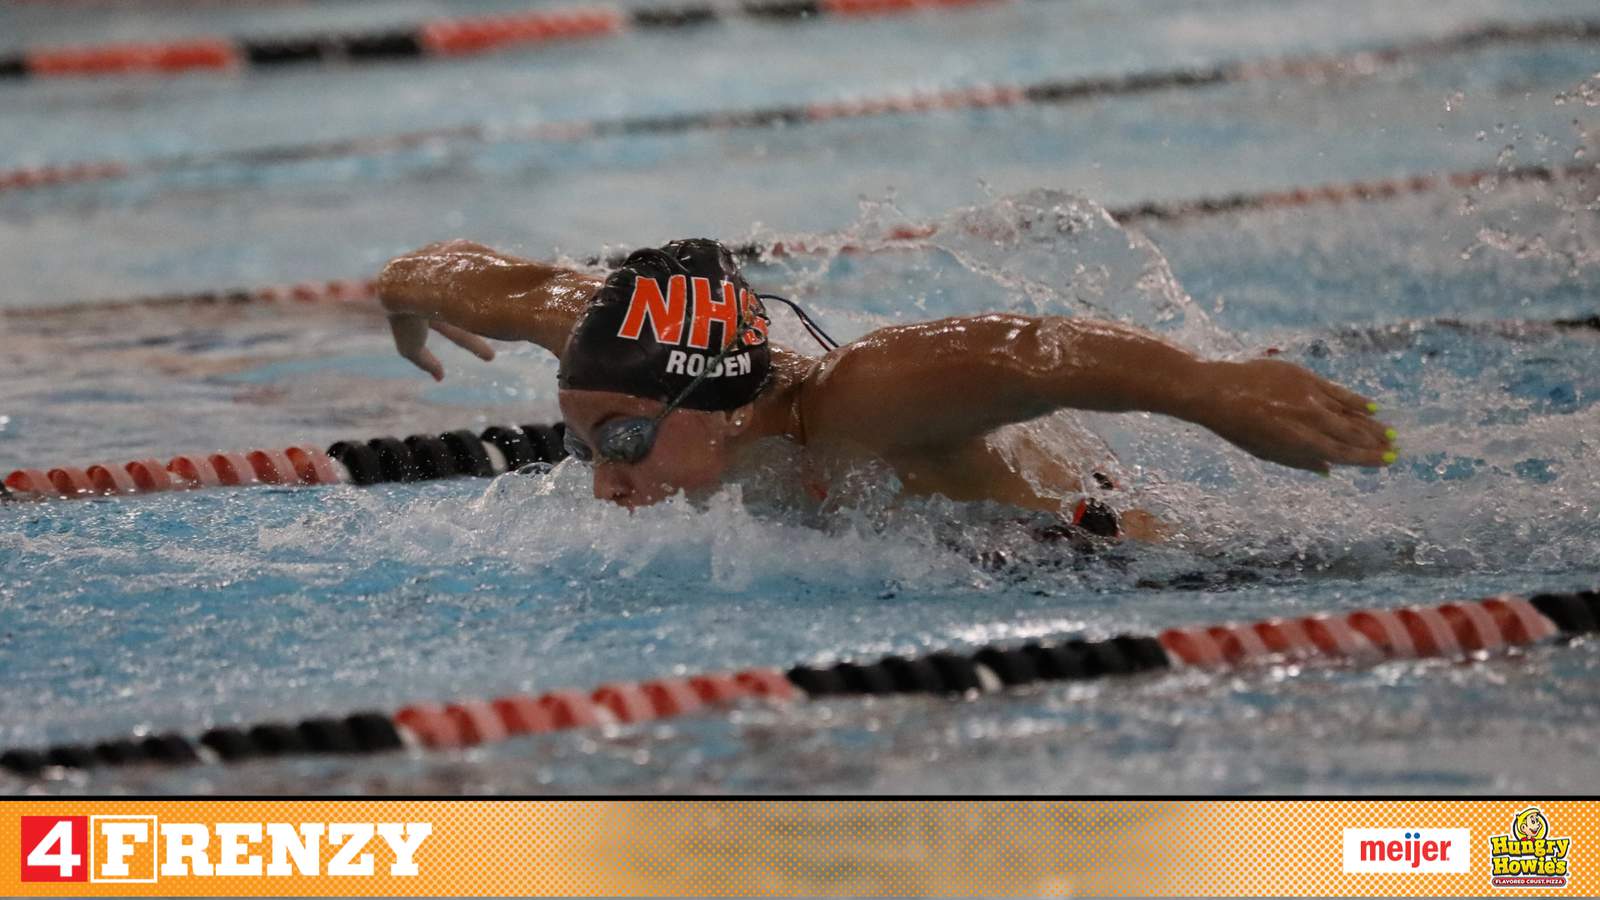 SPOTLIGHT: From ‘Goldfish’ to ‘Sturgeon’ - Northville High sophomore is a 4Frenzy Favorite